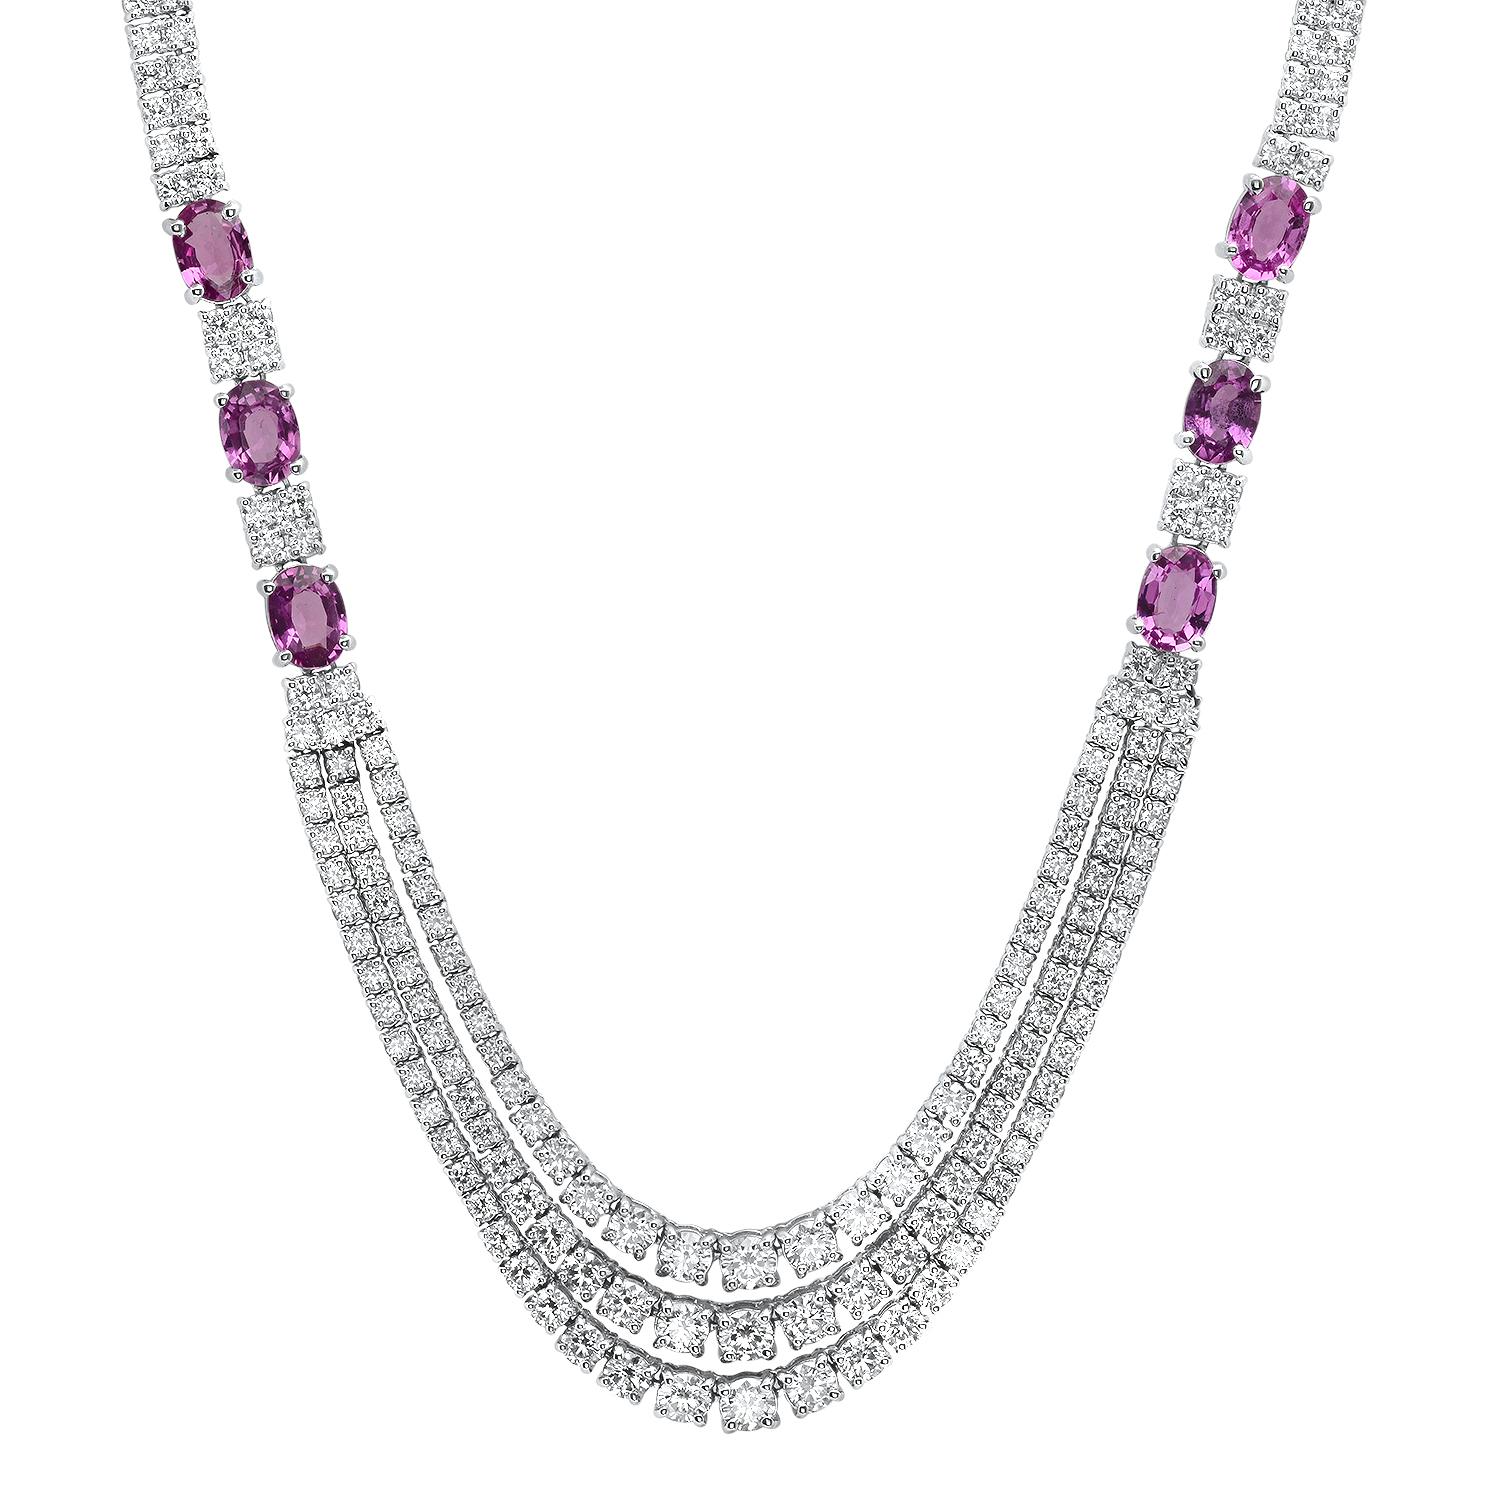 18K White Gold 9.83ct Diamond and 5.75ct Pink Sapphire Necklace